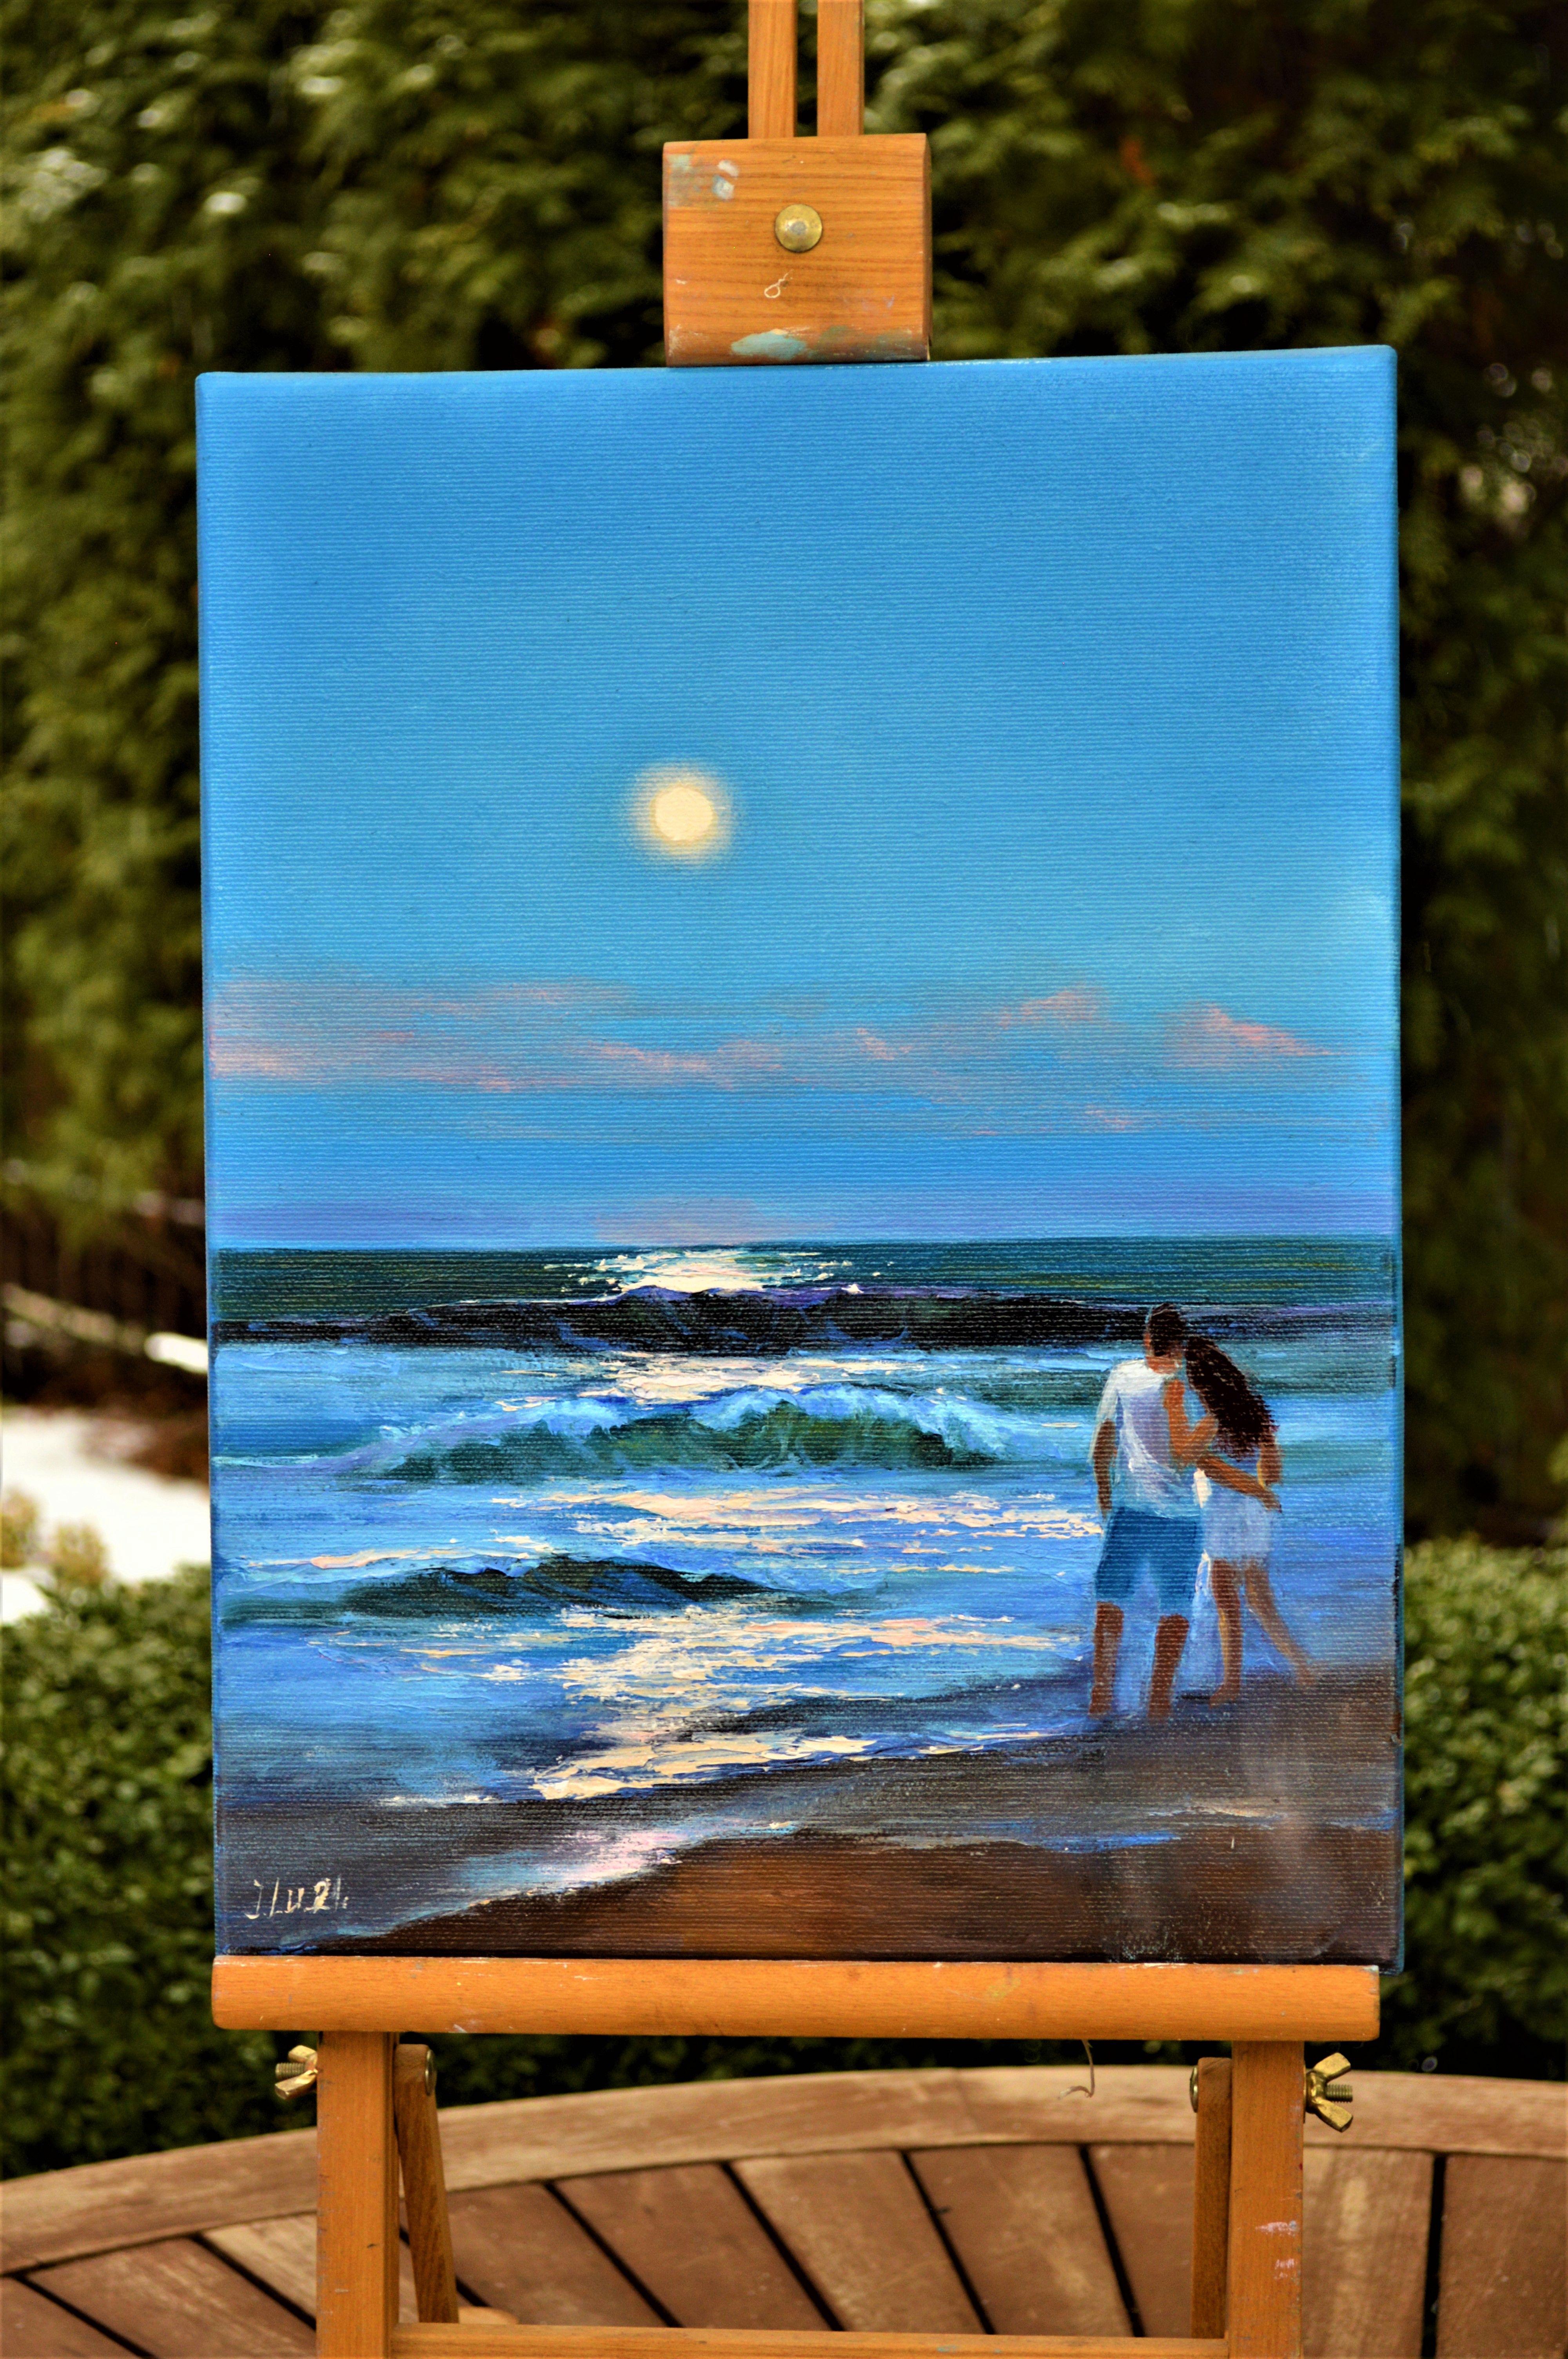 In this oil painting, I've immersed myself in the raw emotion of human connection against nature's canvas. I've melded expressionism with a touch of realism to capture an intimate moment between two figures on the shoreline, enveloped by the serene